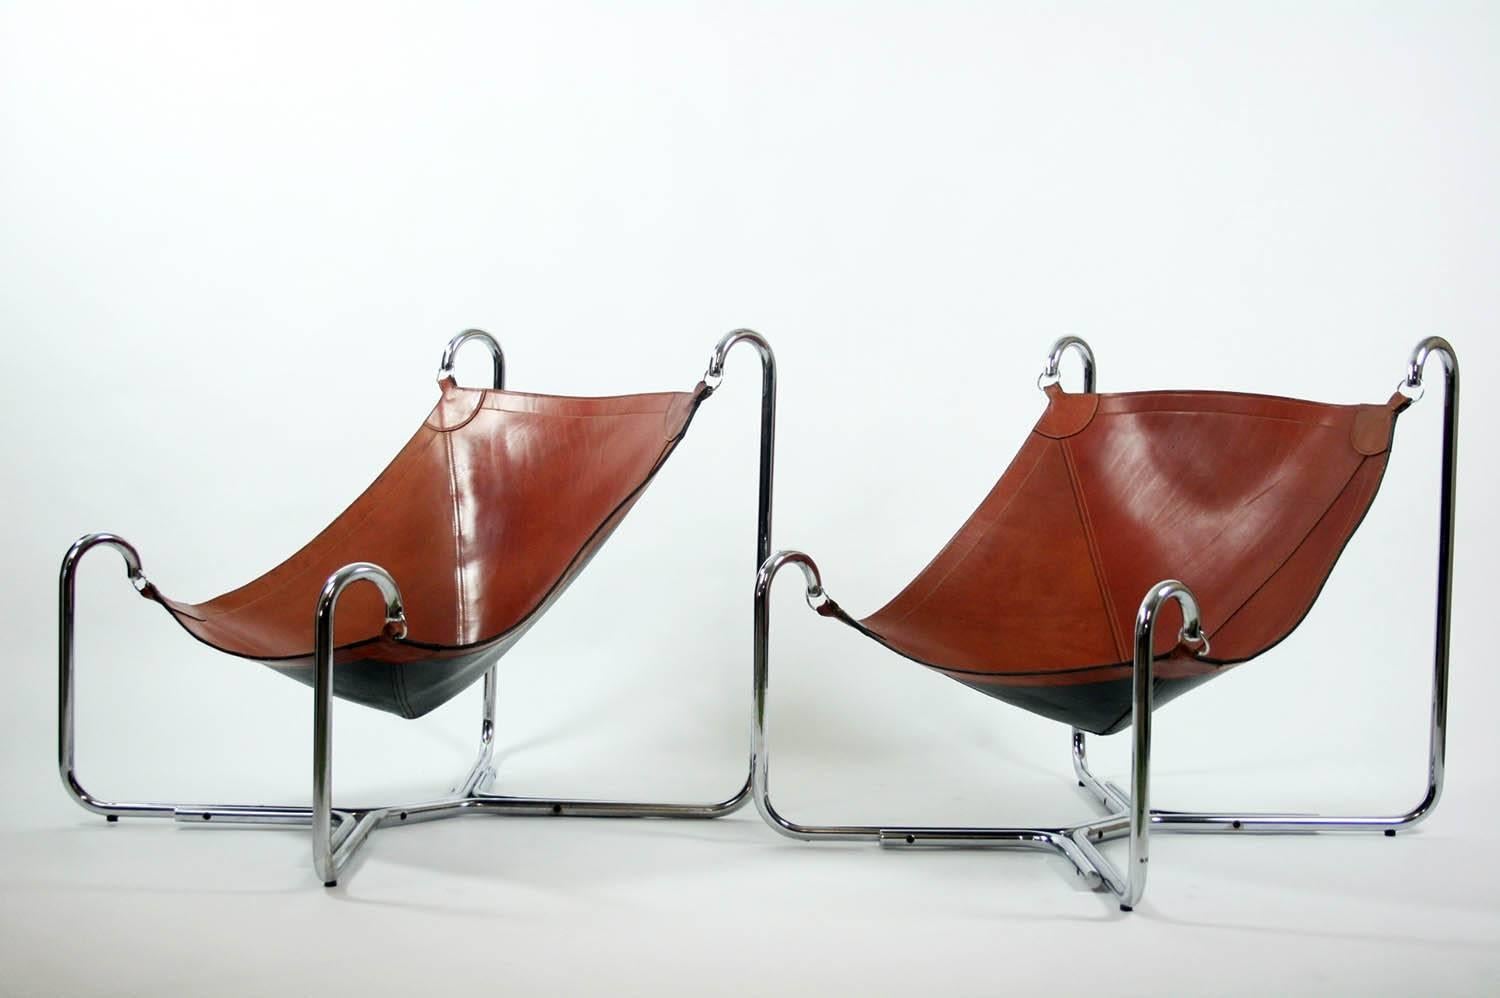 Pair of original vintage Baffo lounge chairs designed in 1969 by Gianni Pareschi and Ezio Didone for Busnelli, Italy. Both chairs are in original leather with beautiful patina.